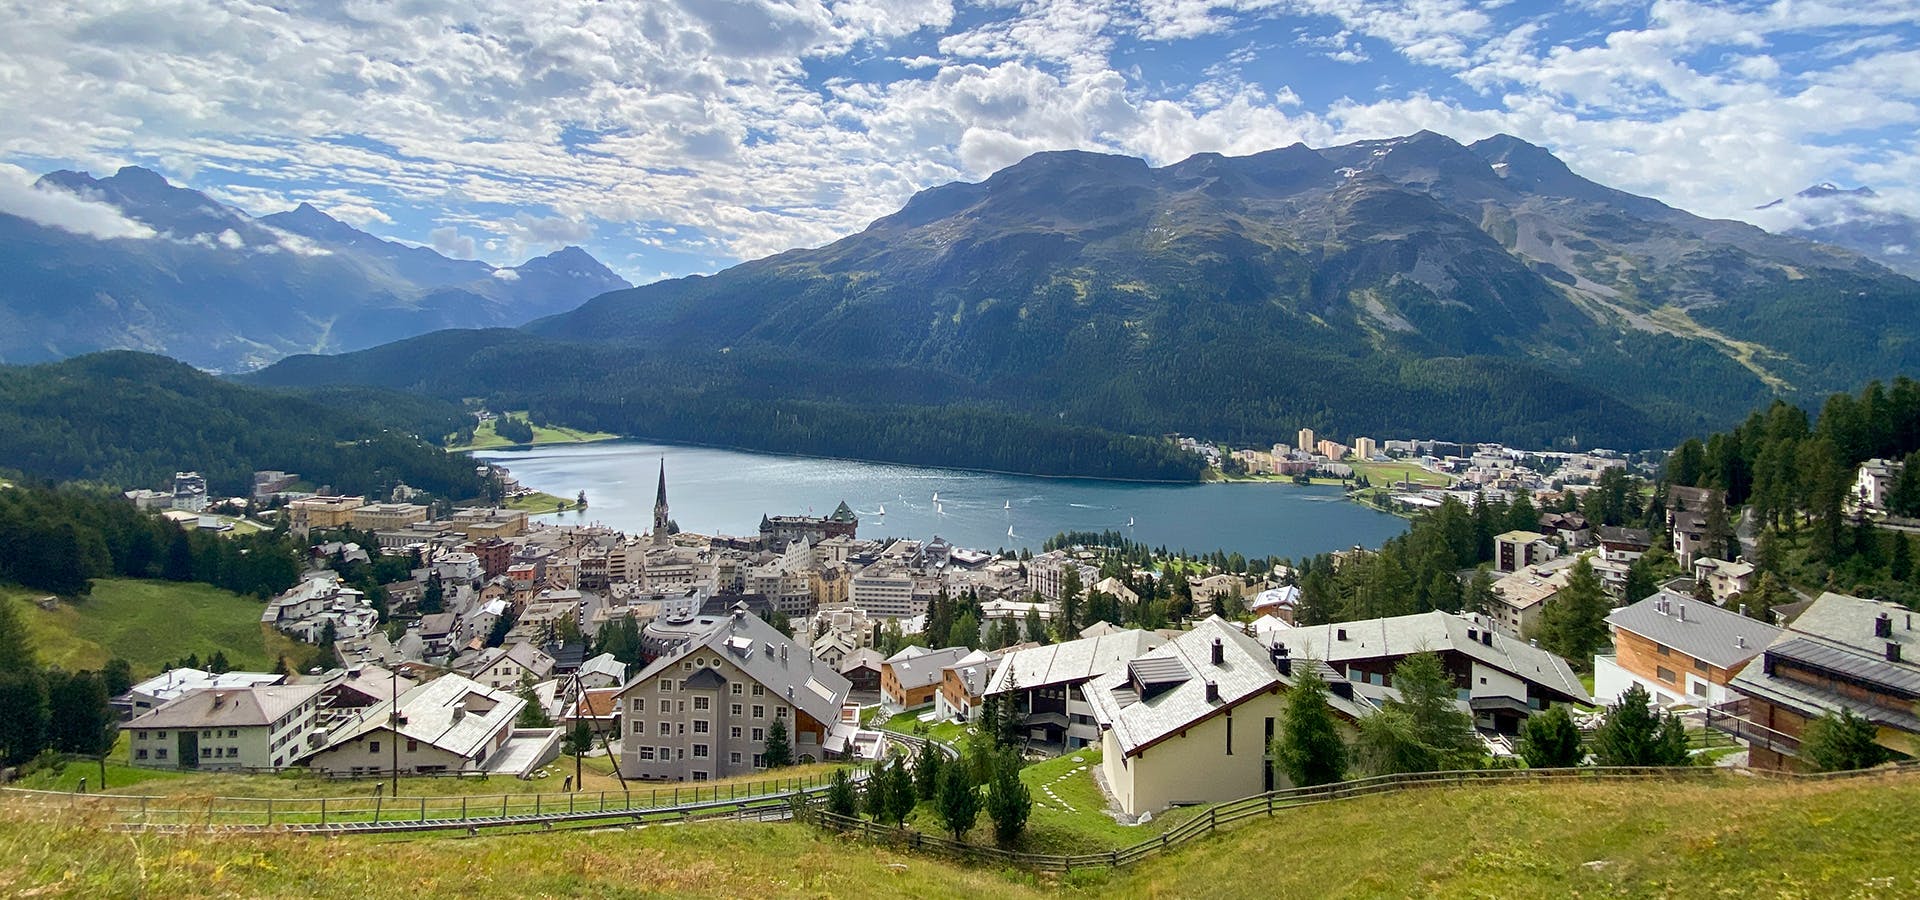 5 Interesting Finds in St. Moritz this Summer - Paradise